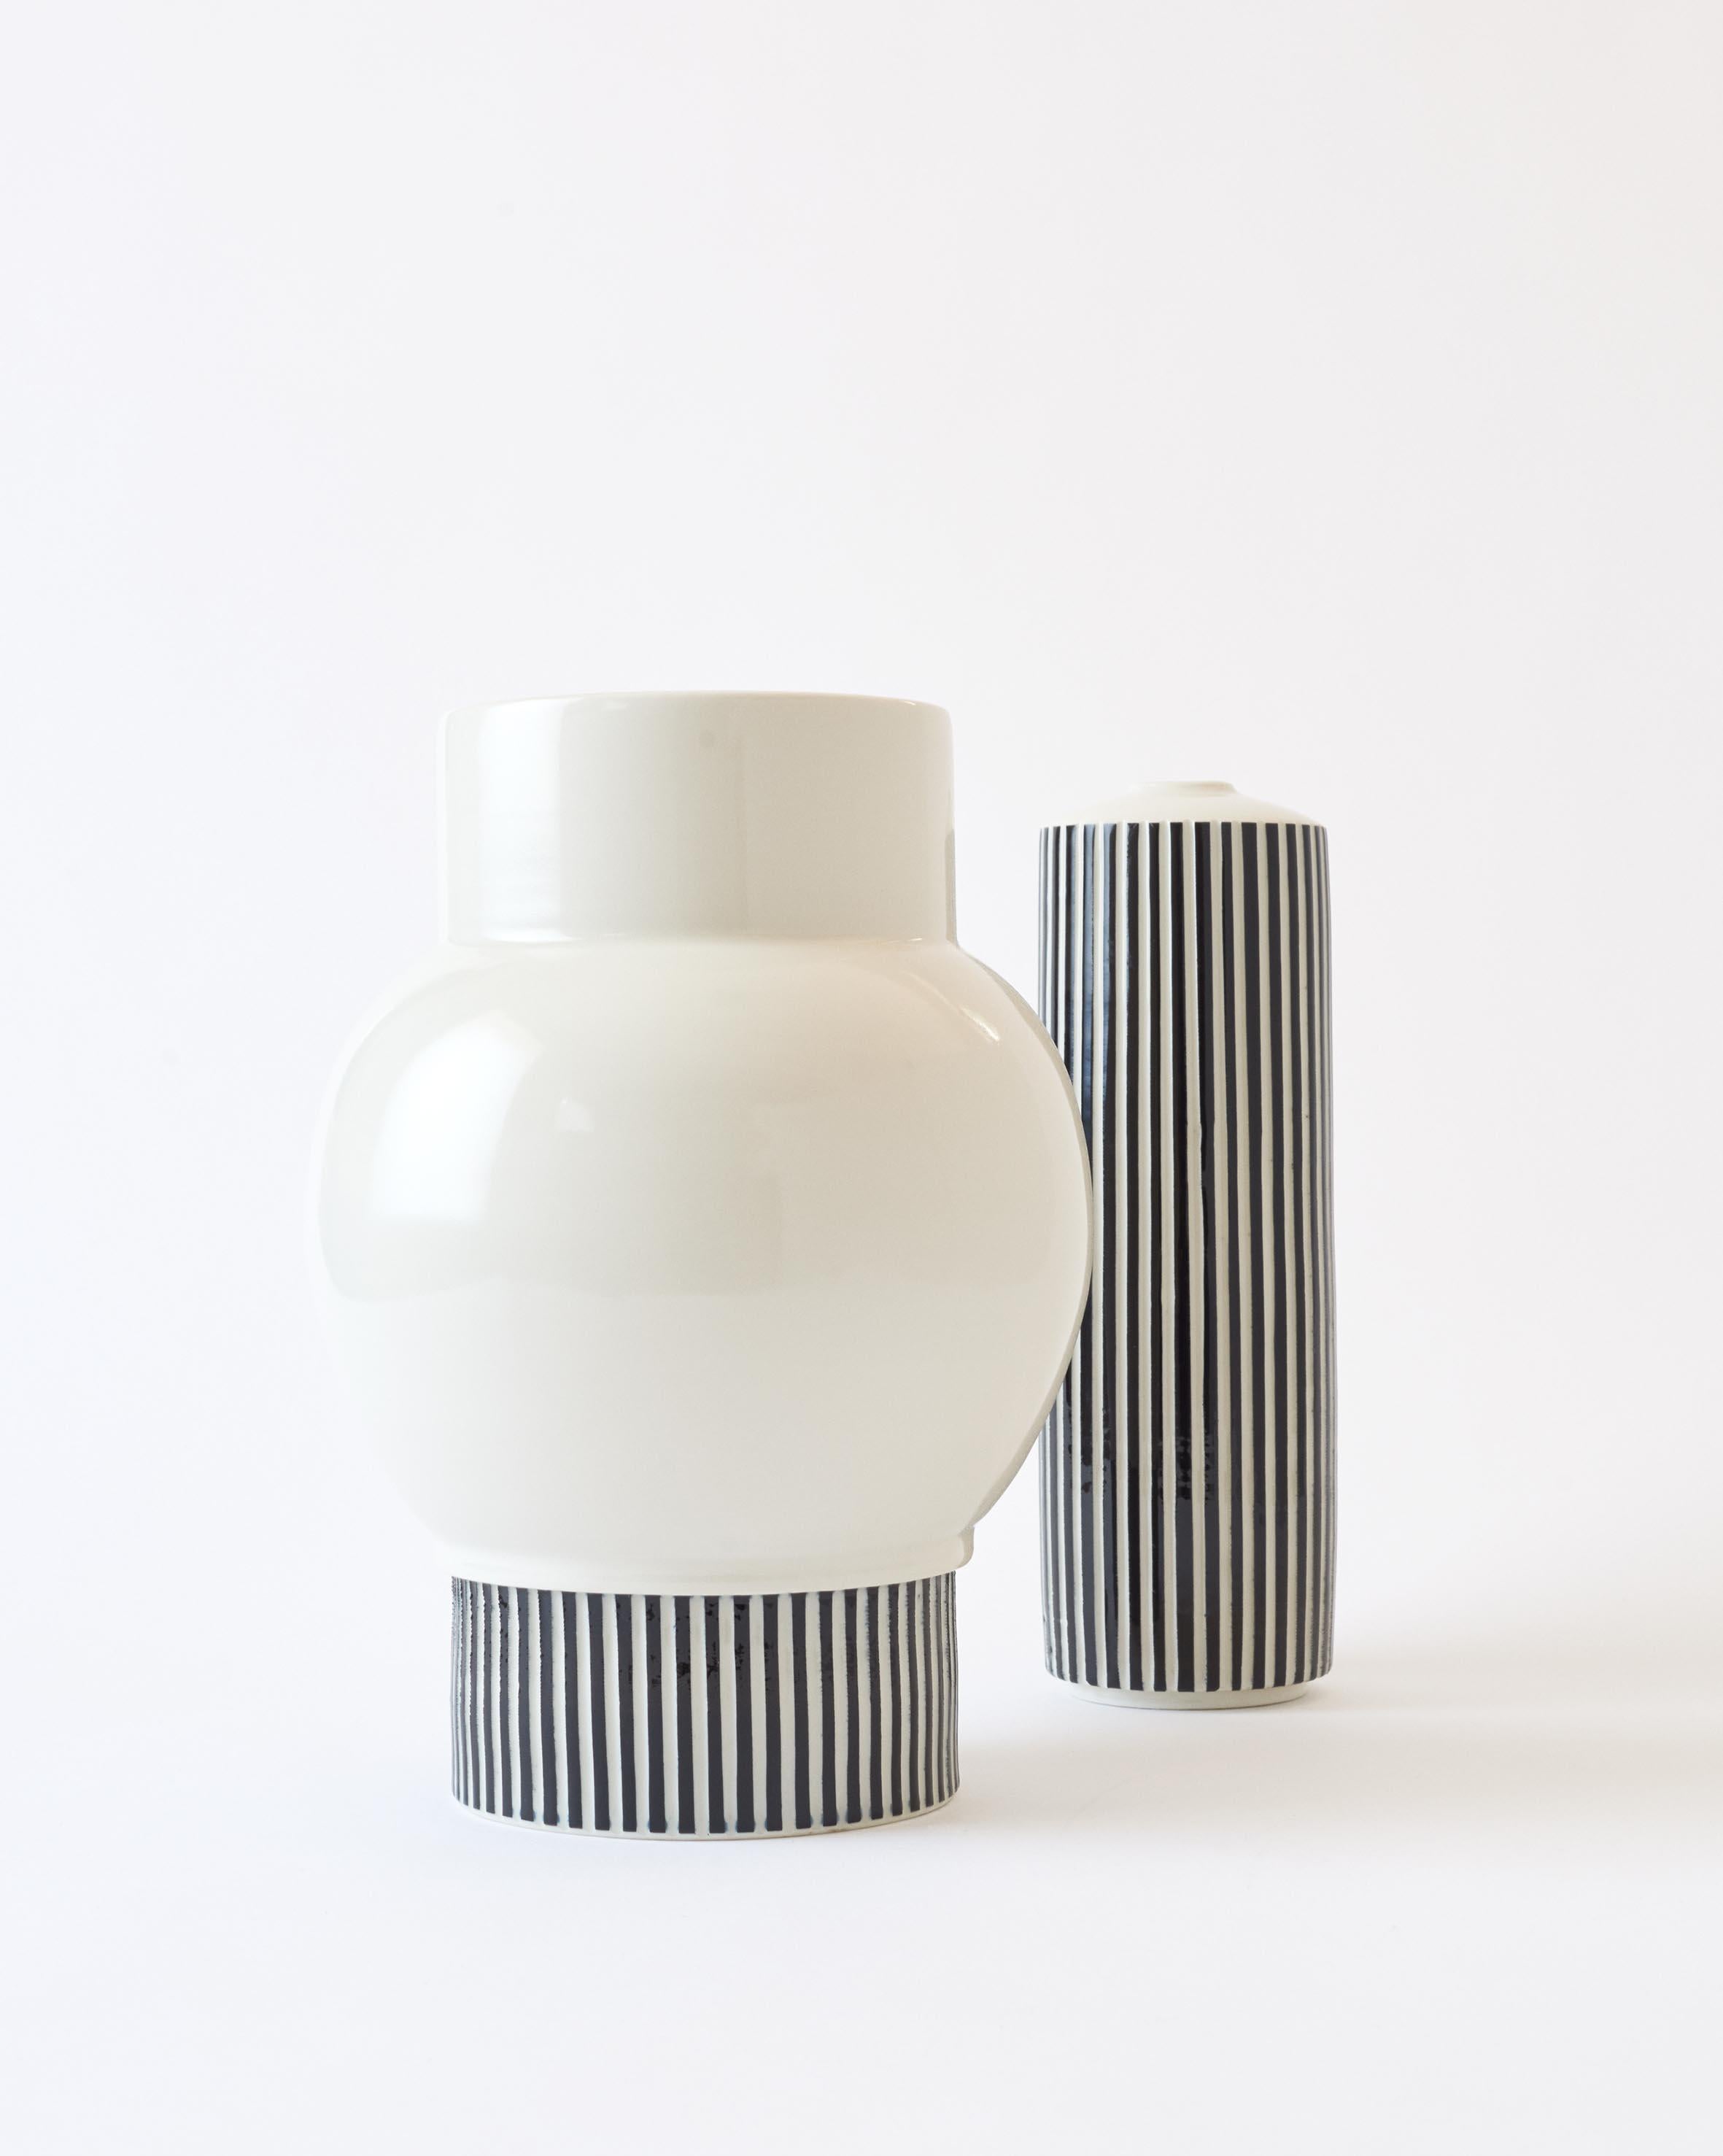 This hand-thrown porcelain vase is a contemporary and functional stand out piece. The vase is made of glossy white porcelain with a hand-carved striped base. The vase has a size of diameter 22.5cm, height 32cm

The first Atlas Crafts collection is